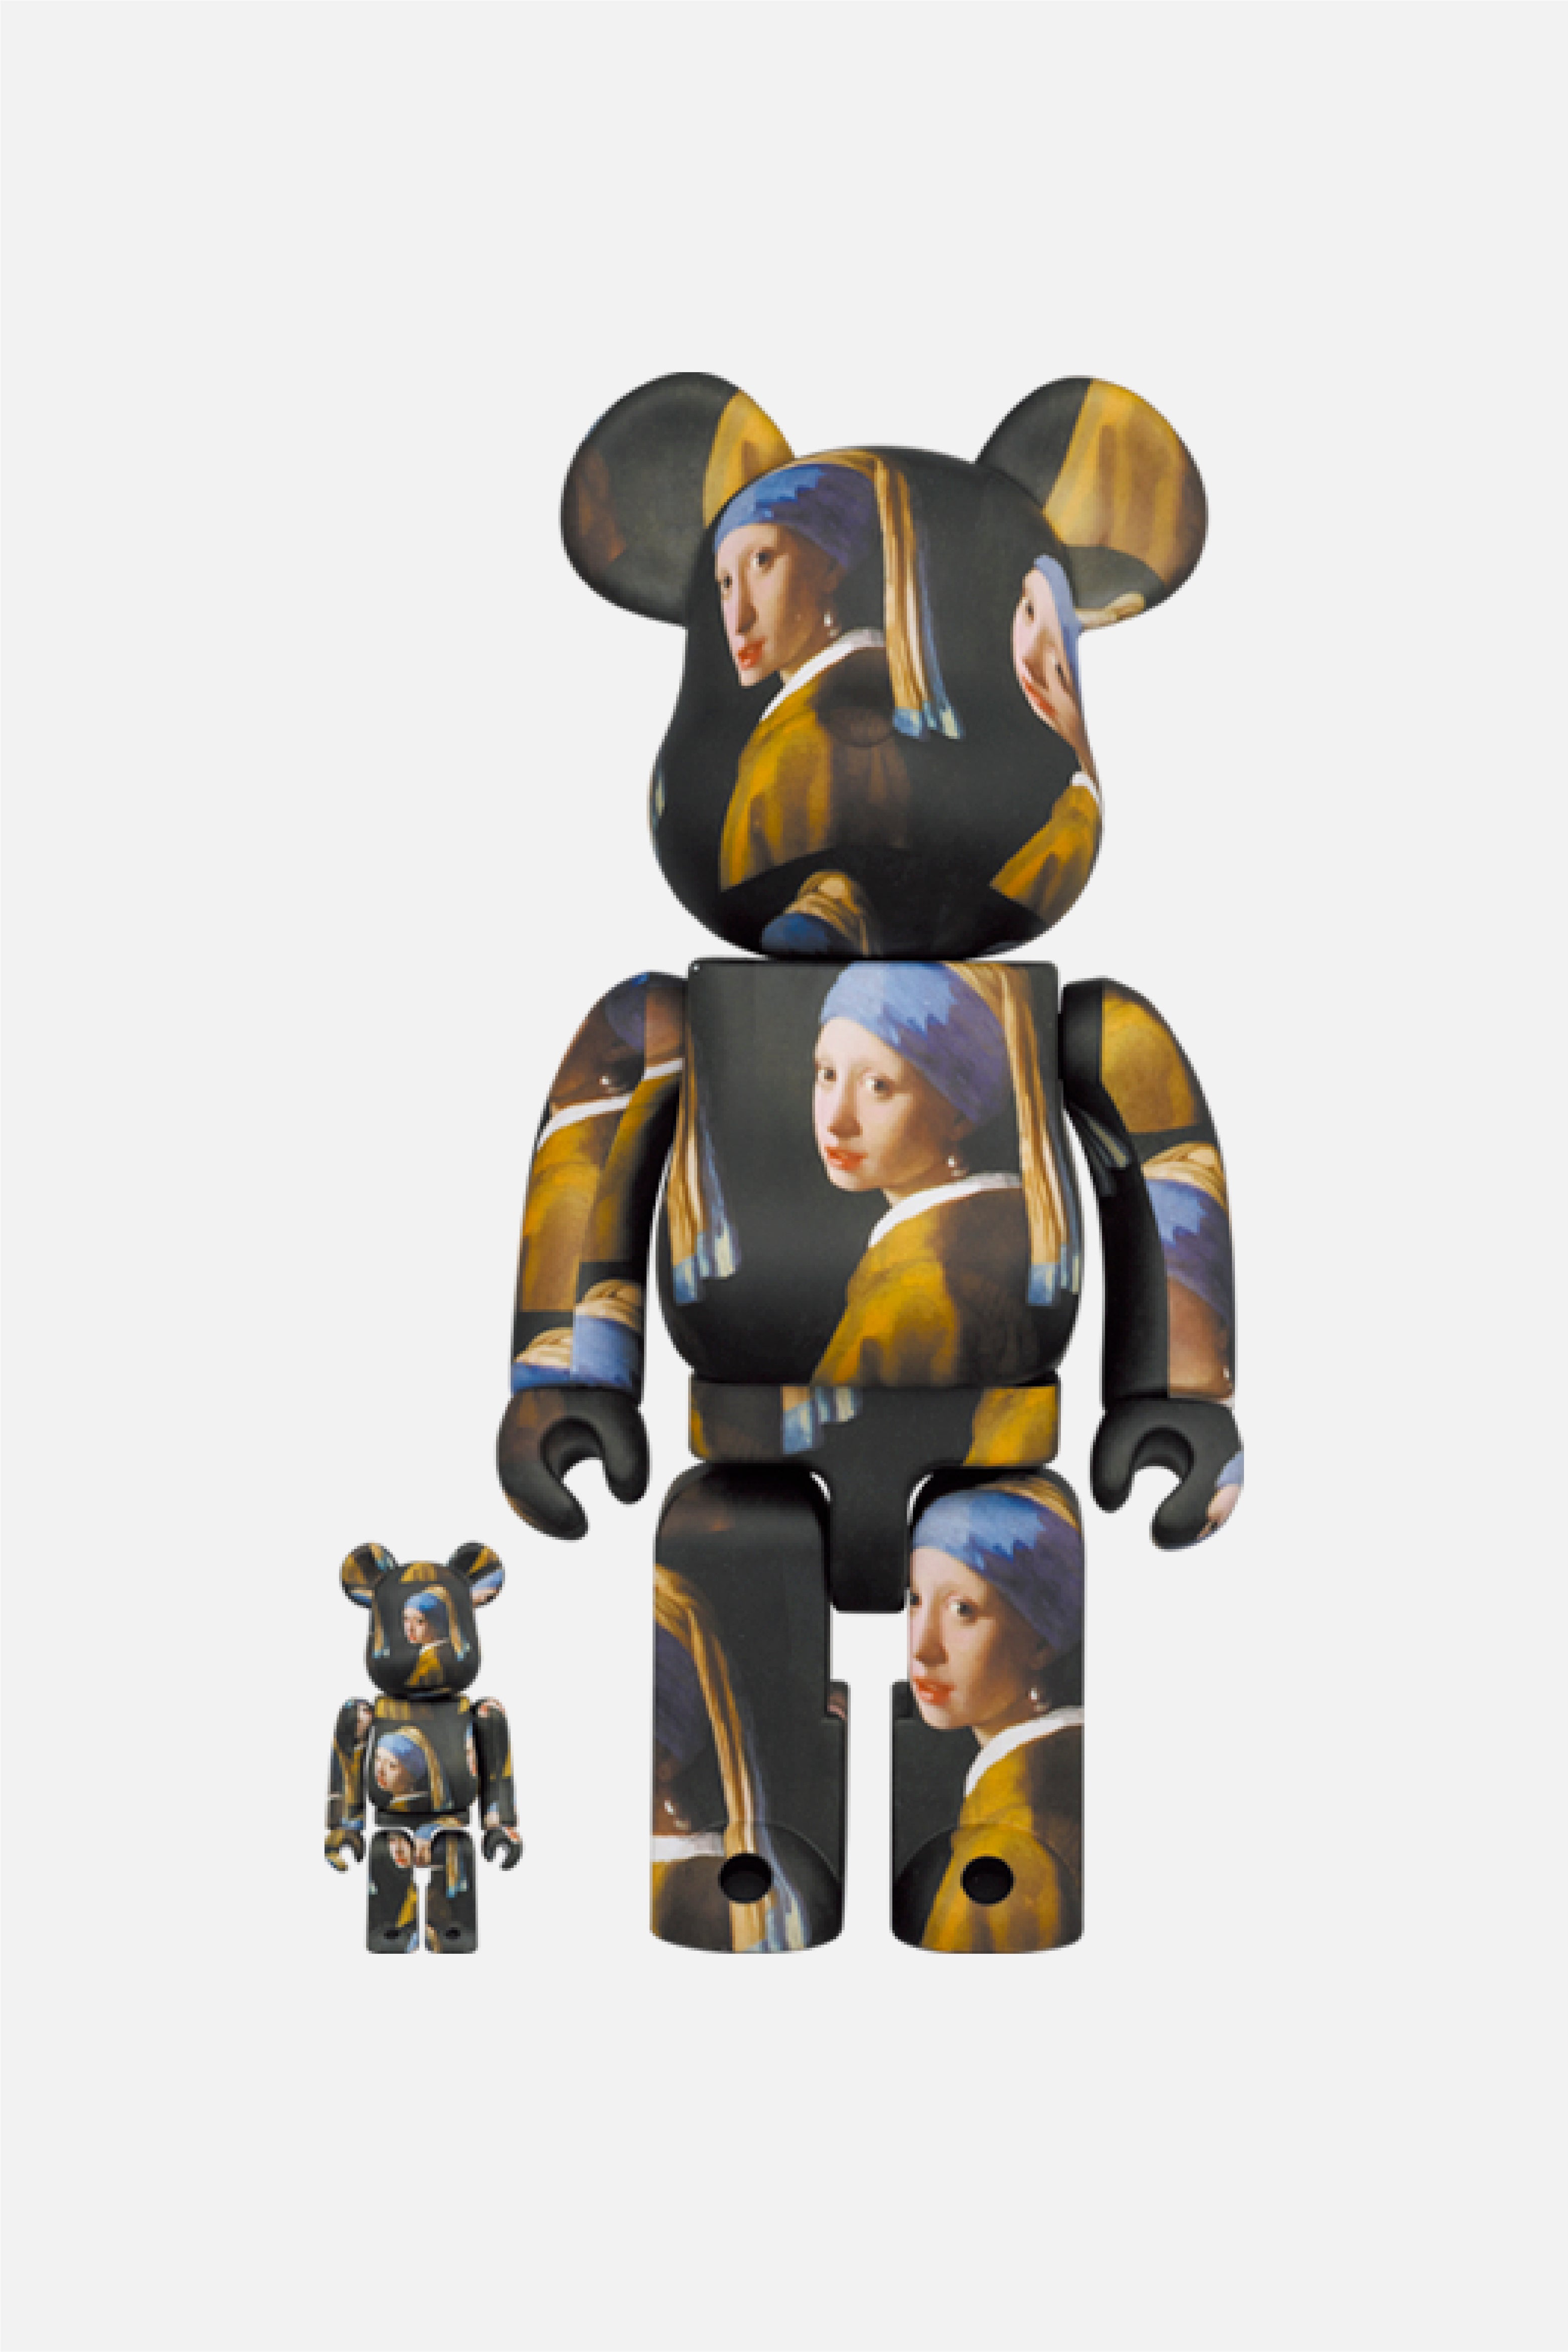 Selectshop FRAME - MEDICOM TOY Be@rbrick Johannes Vermeer (Girl With A Pearl Earring) 400%+100% Collectibles Dubai